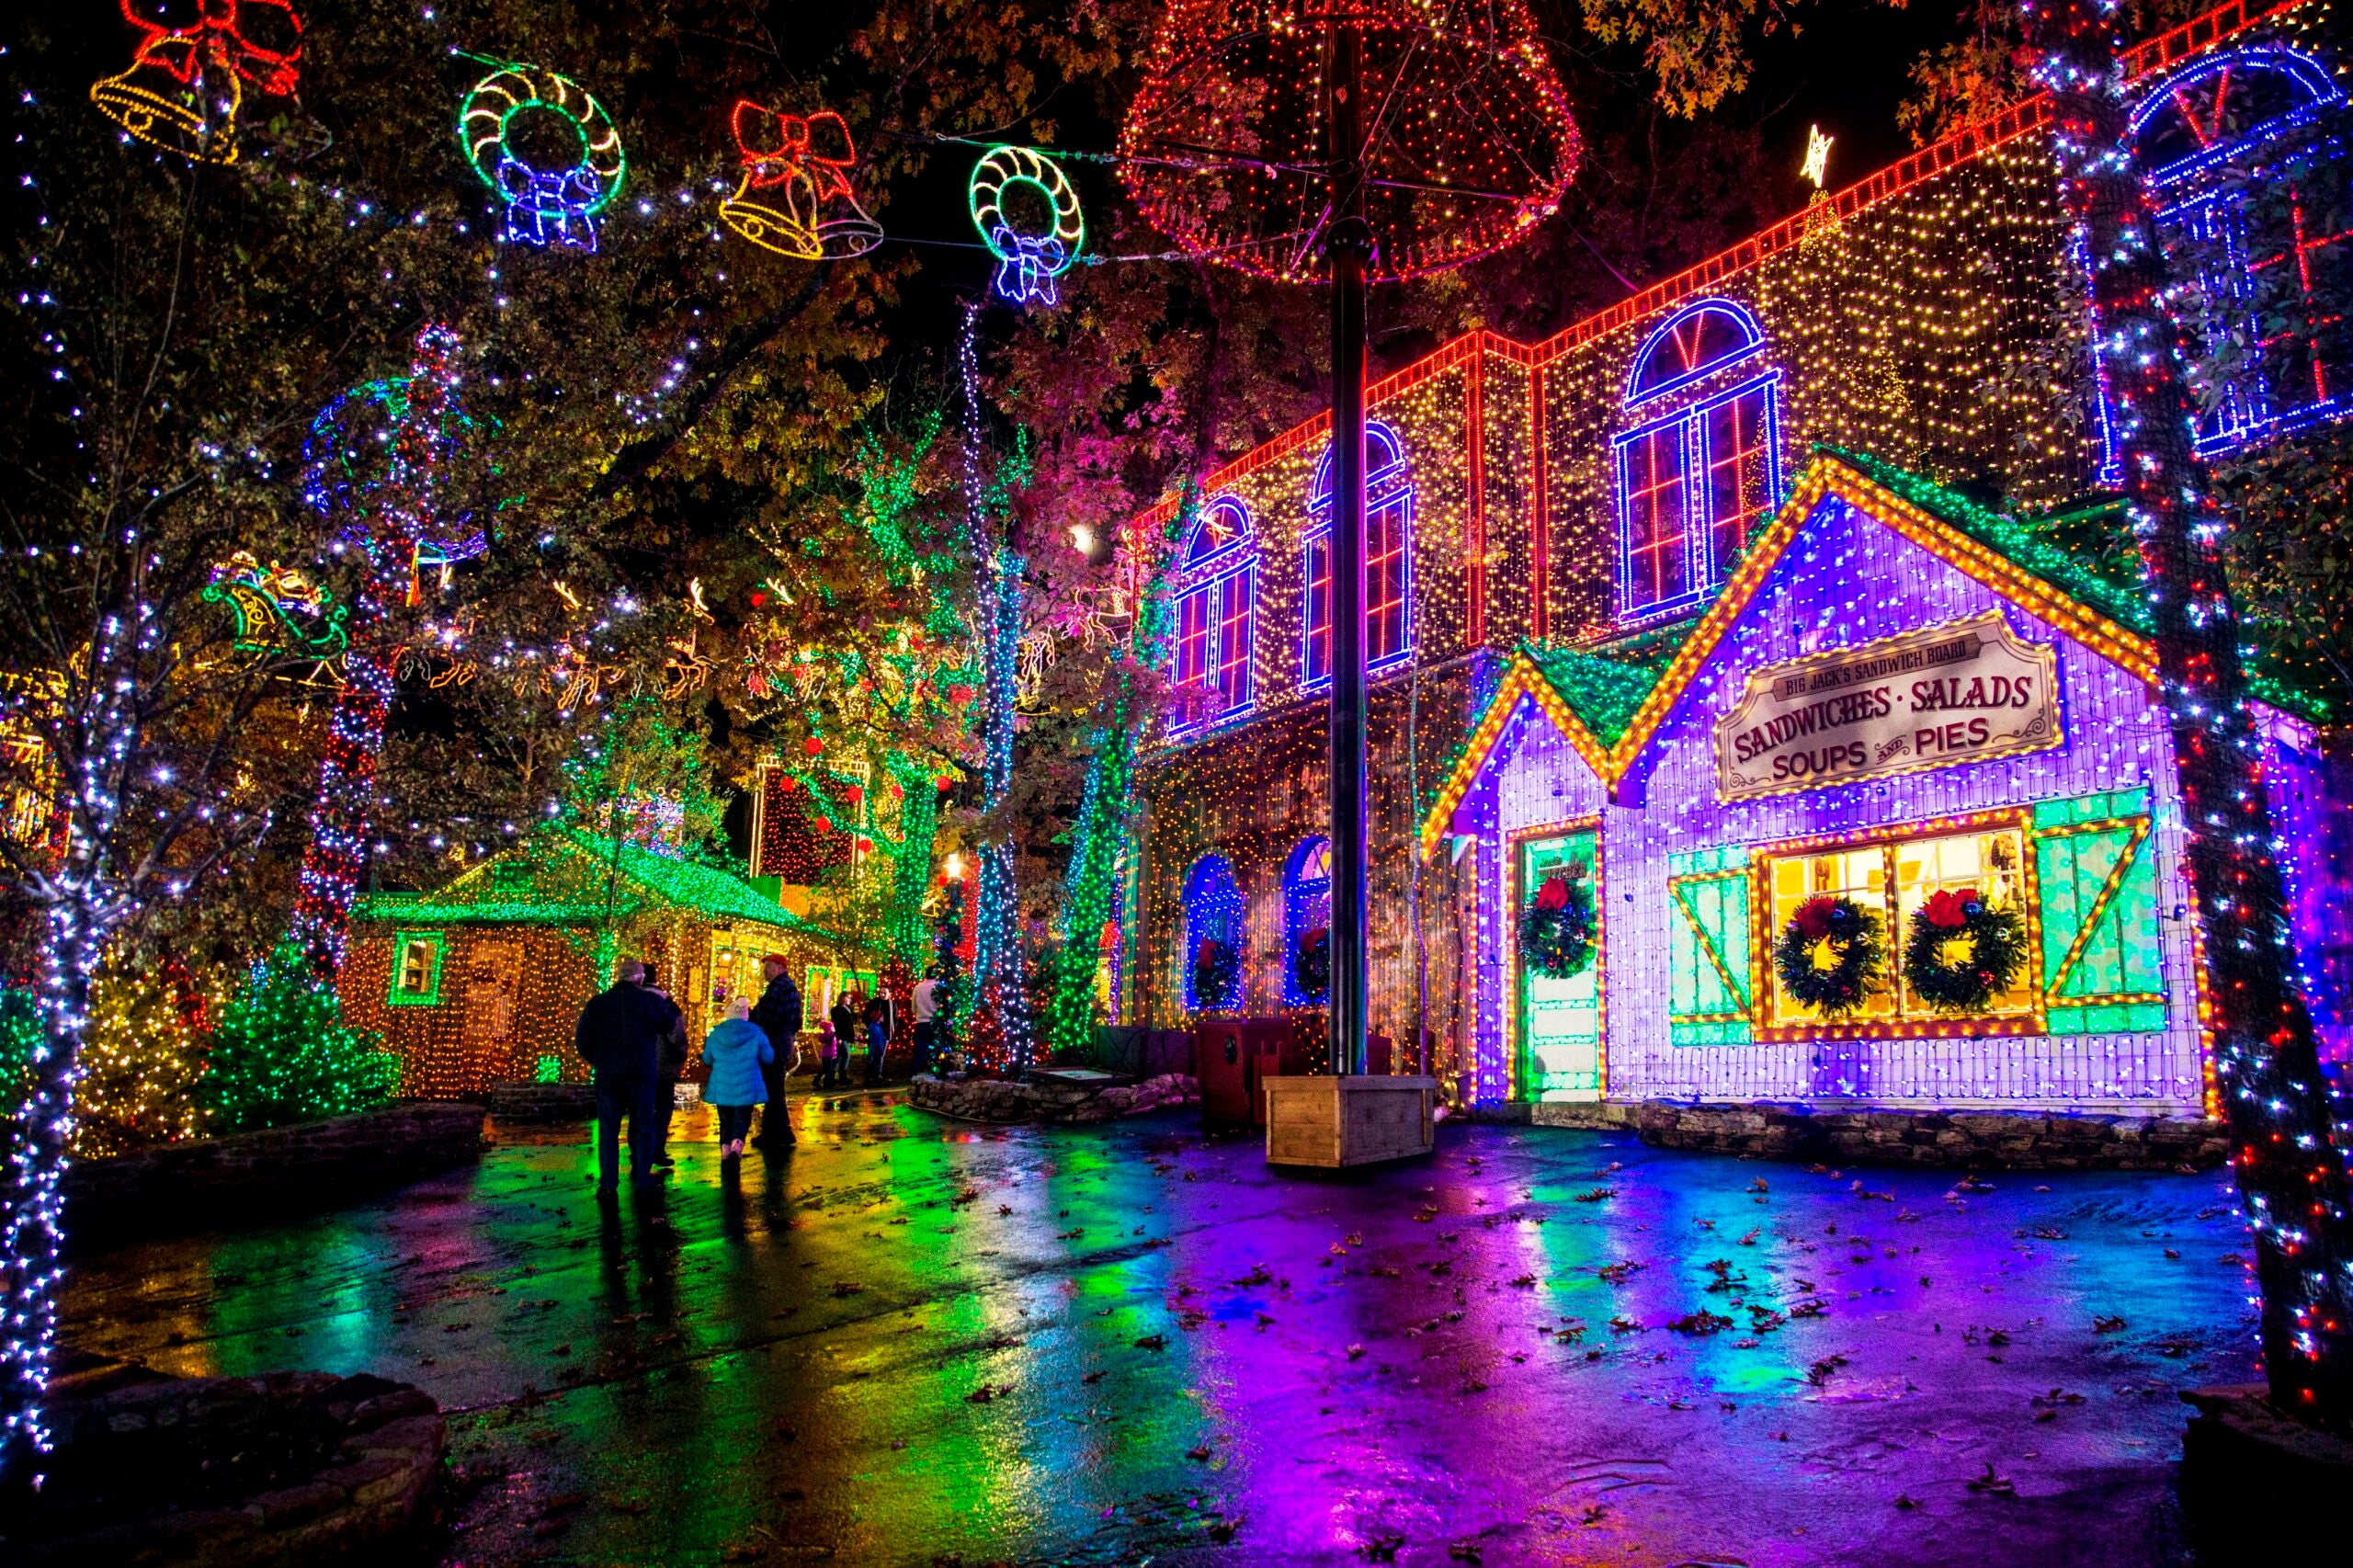 TPG's guide to 13 of the best holiday light shows in the US The